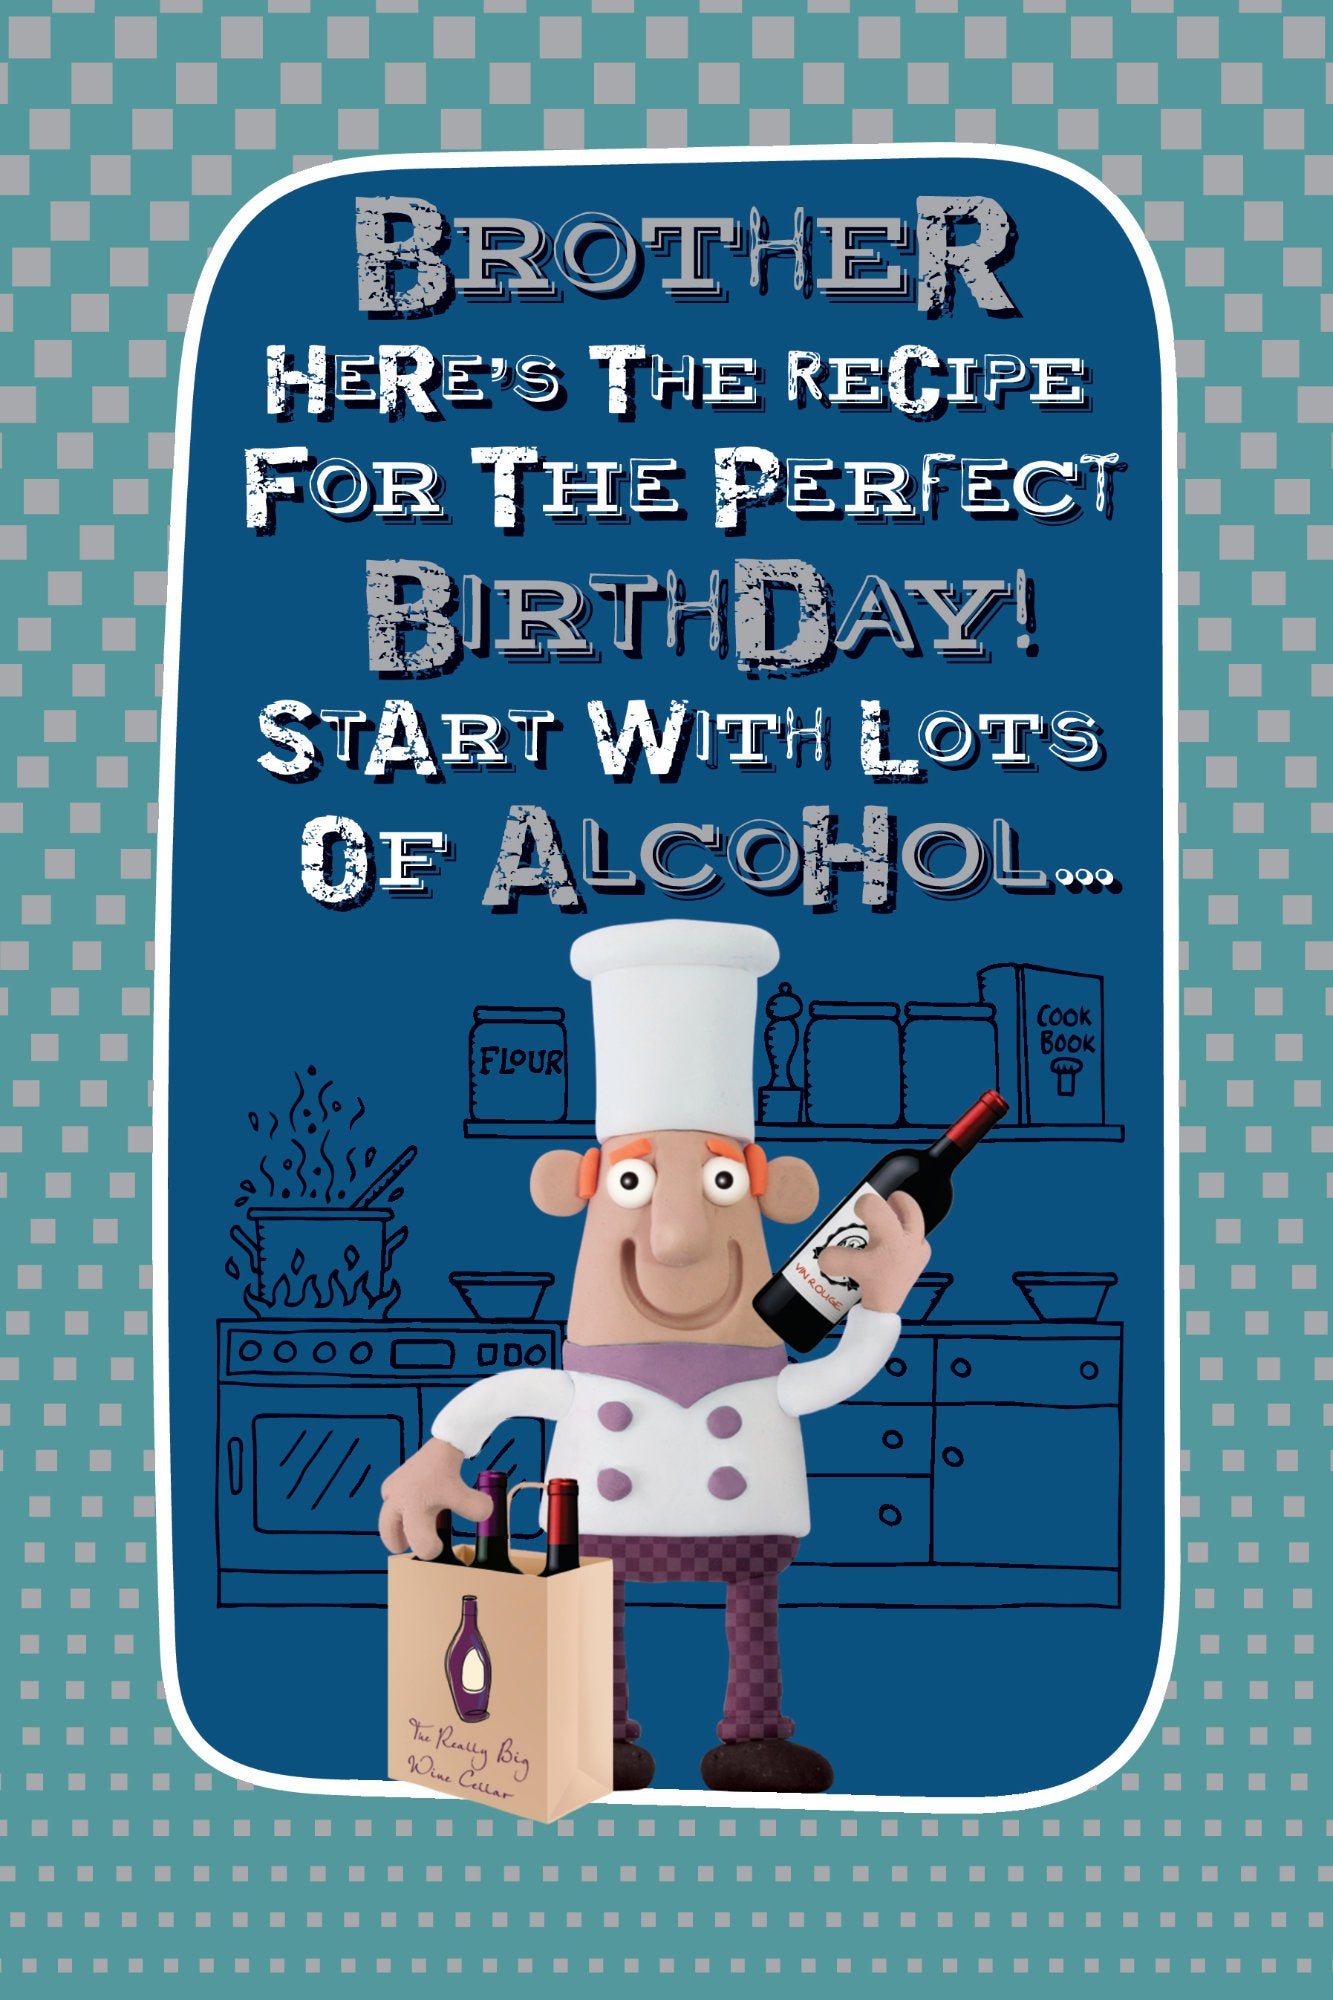 Photograph of Brother Birthday Perfect Recipe Greetings Card at Nicole's Shop